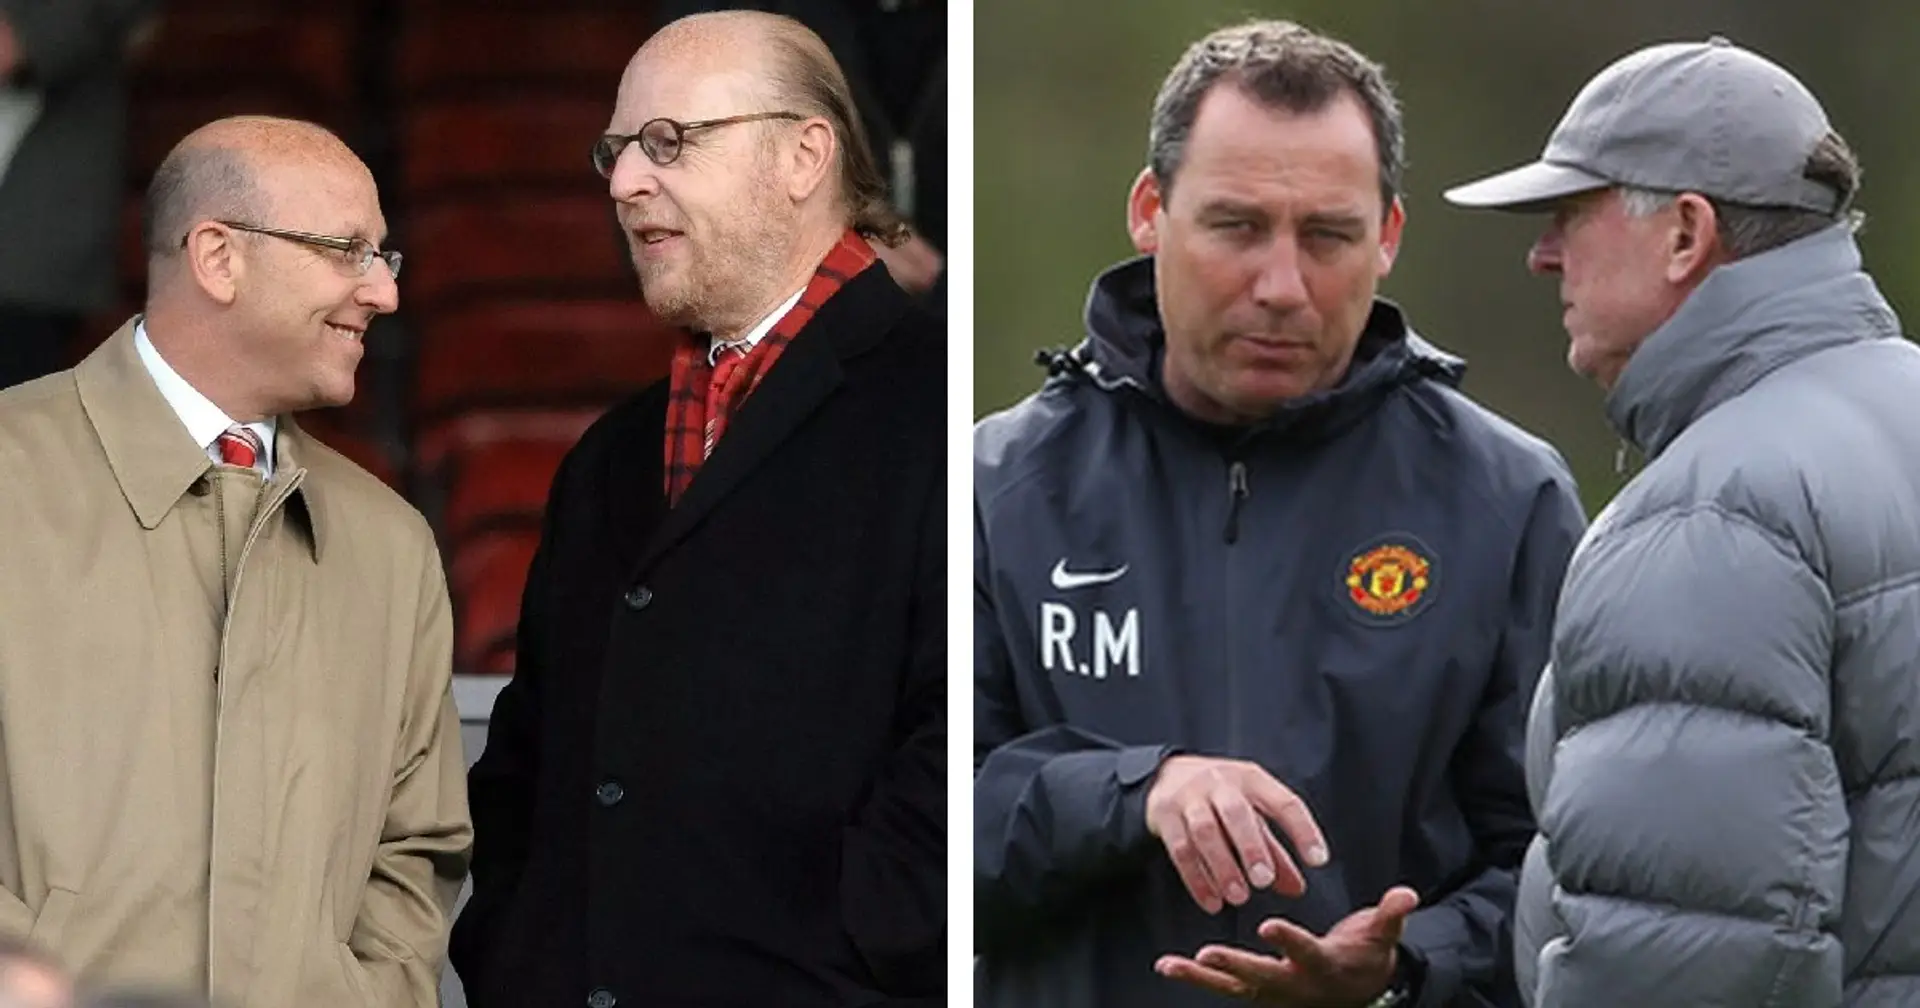 'It's too ridiculous for words': Rene Meulensteen on Glazer ownership of Man United